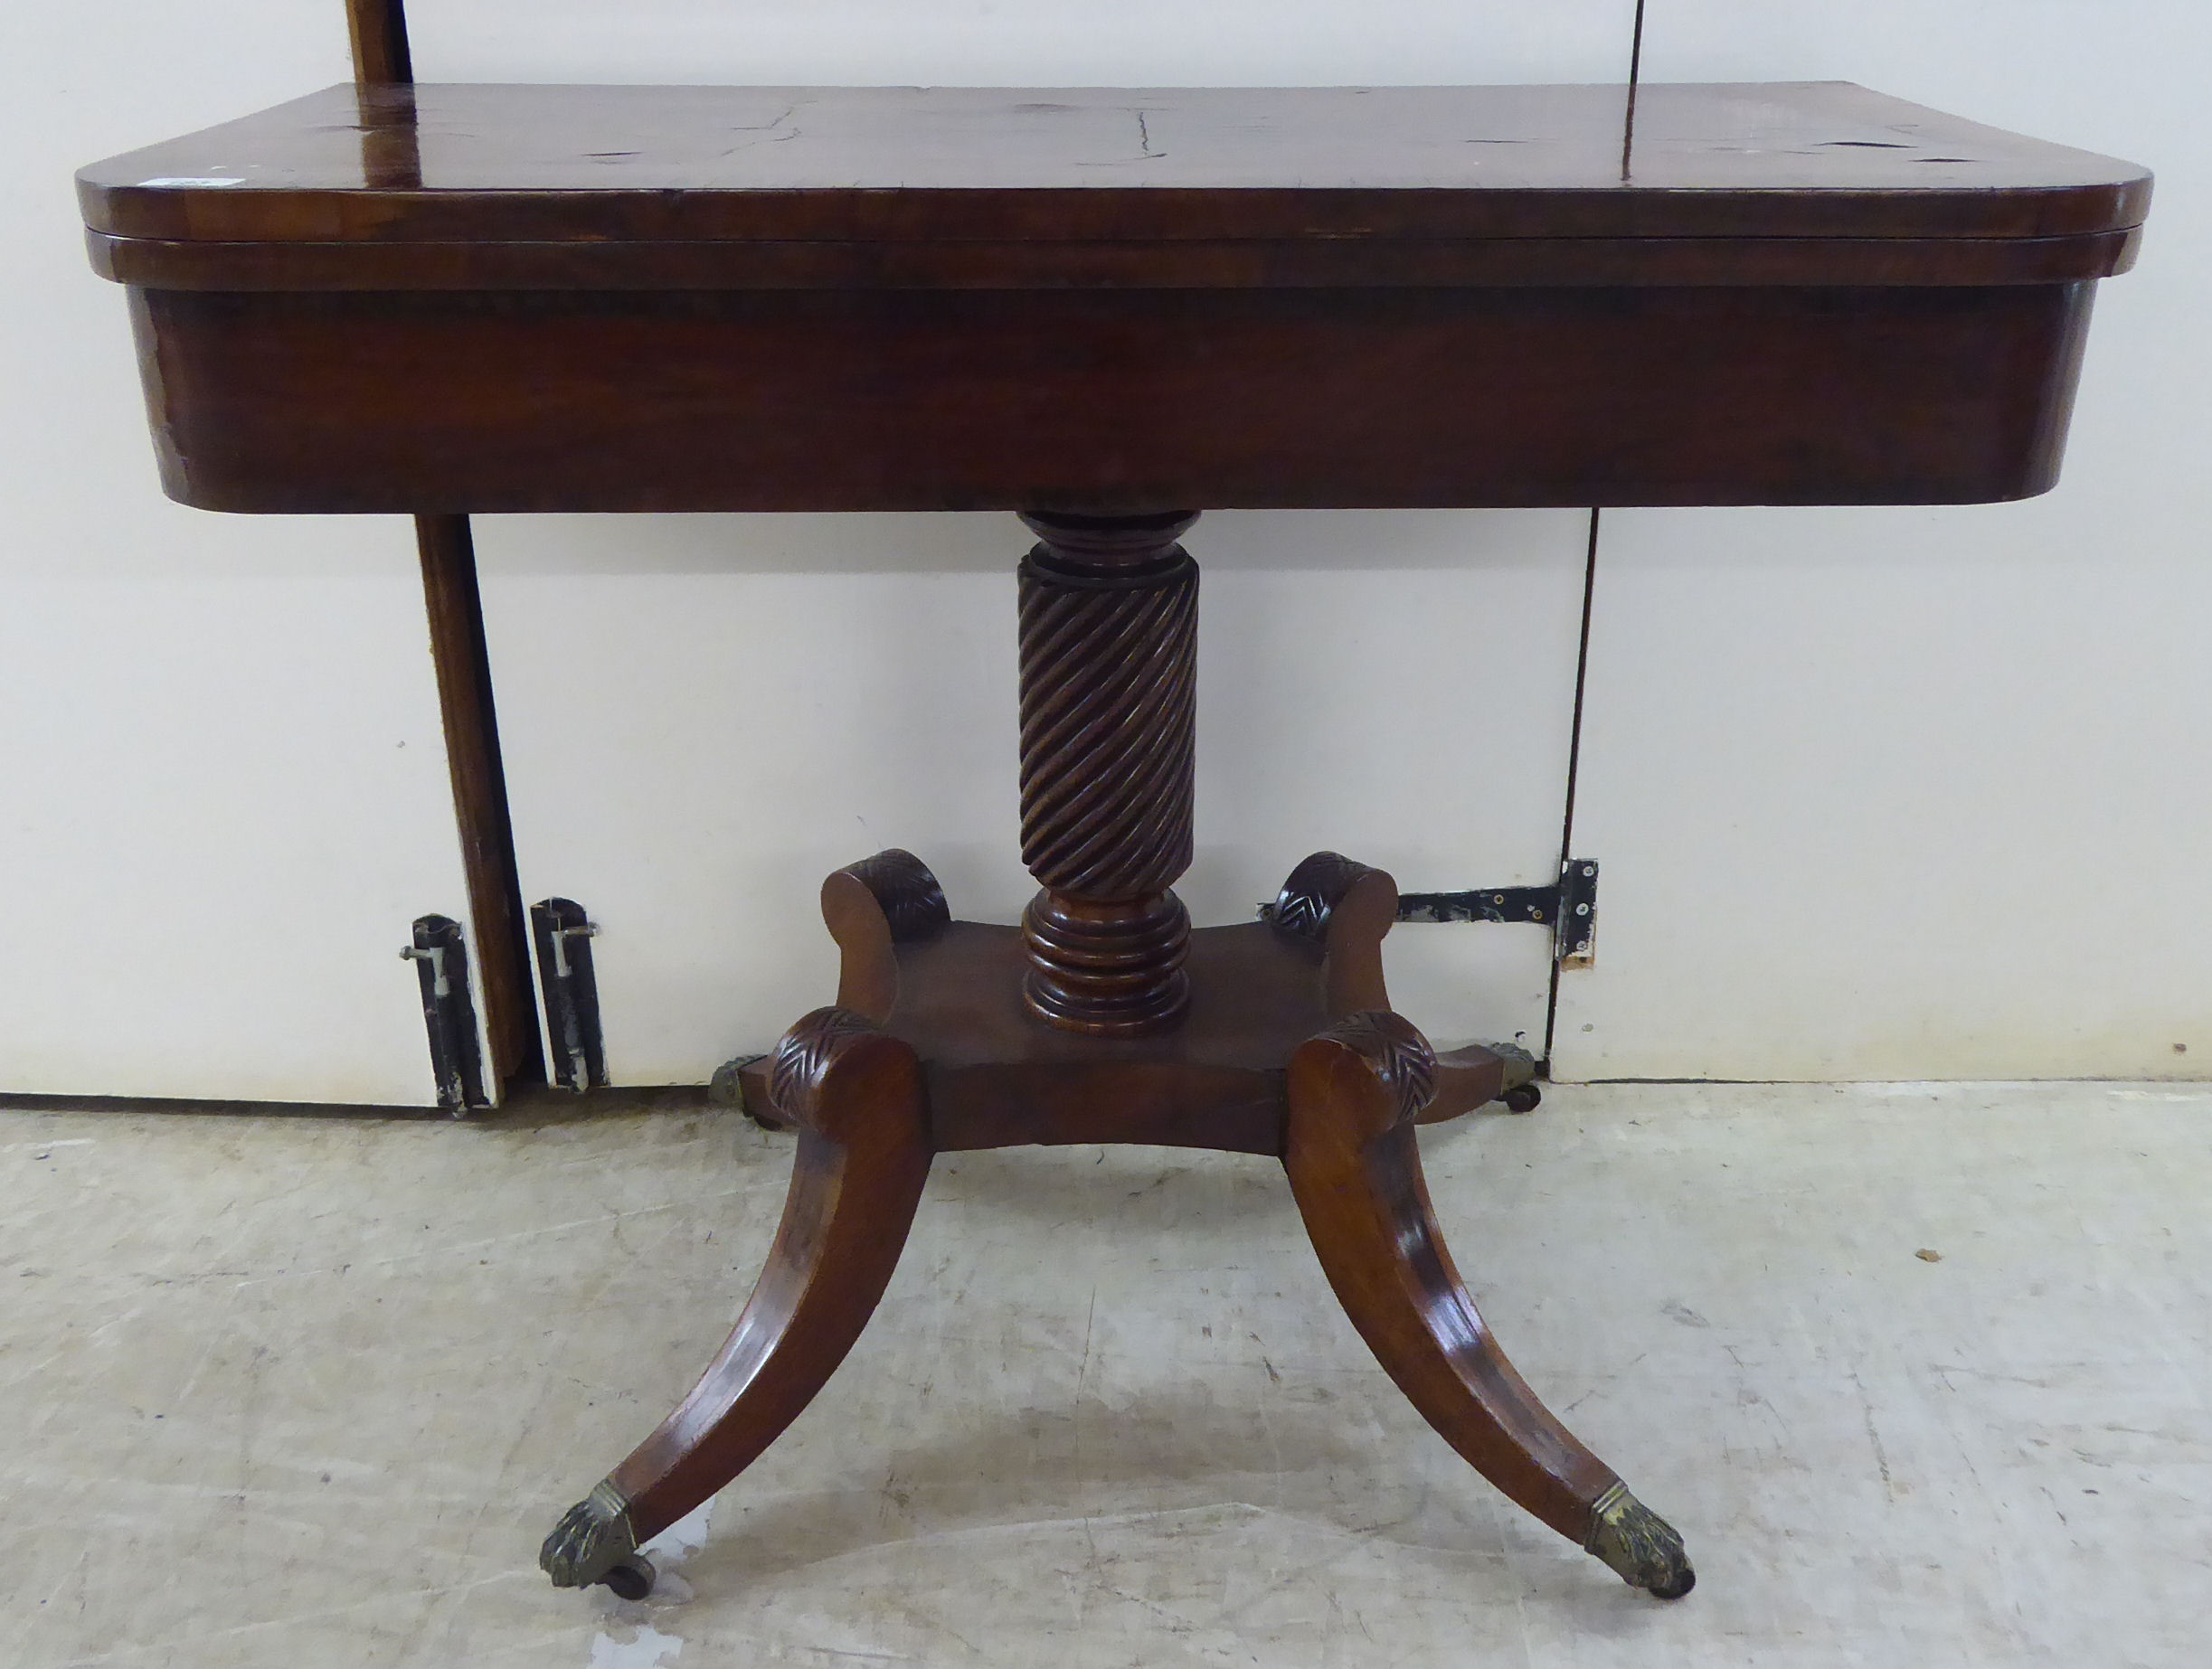 A Regency crossbanded, rosewood and mahogany card table with a foldover top,